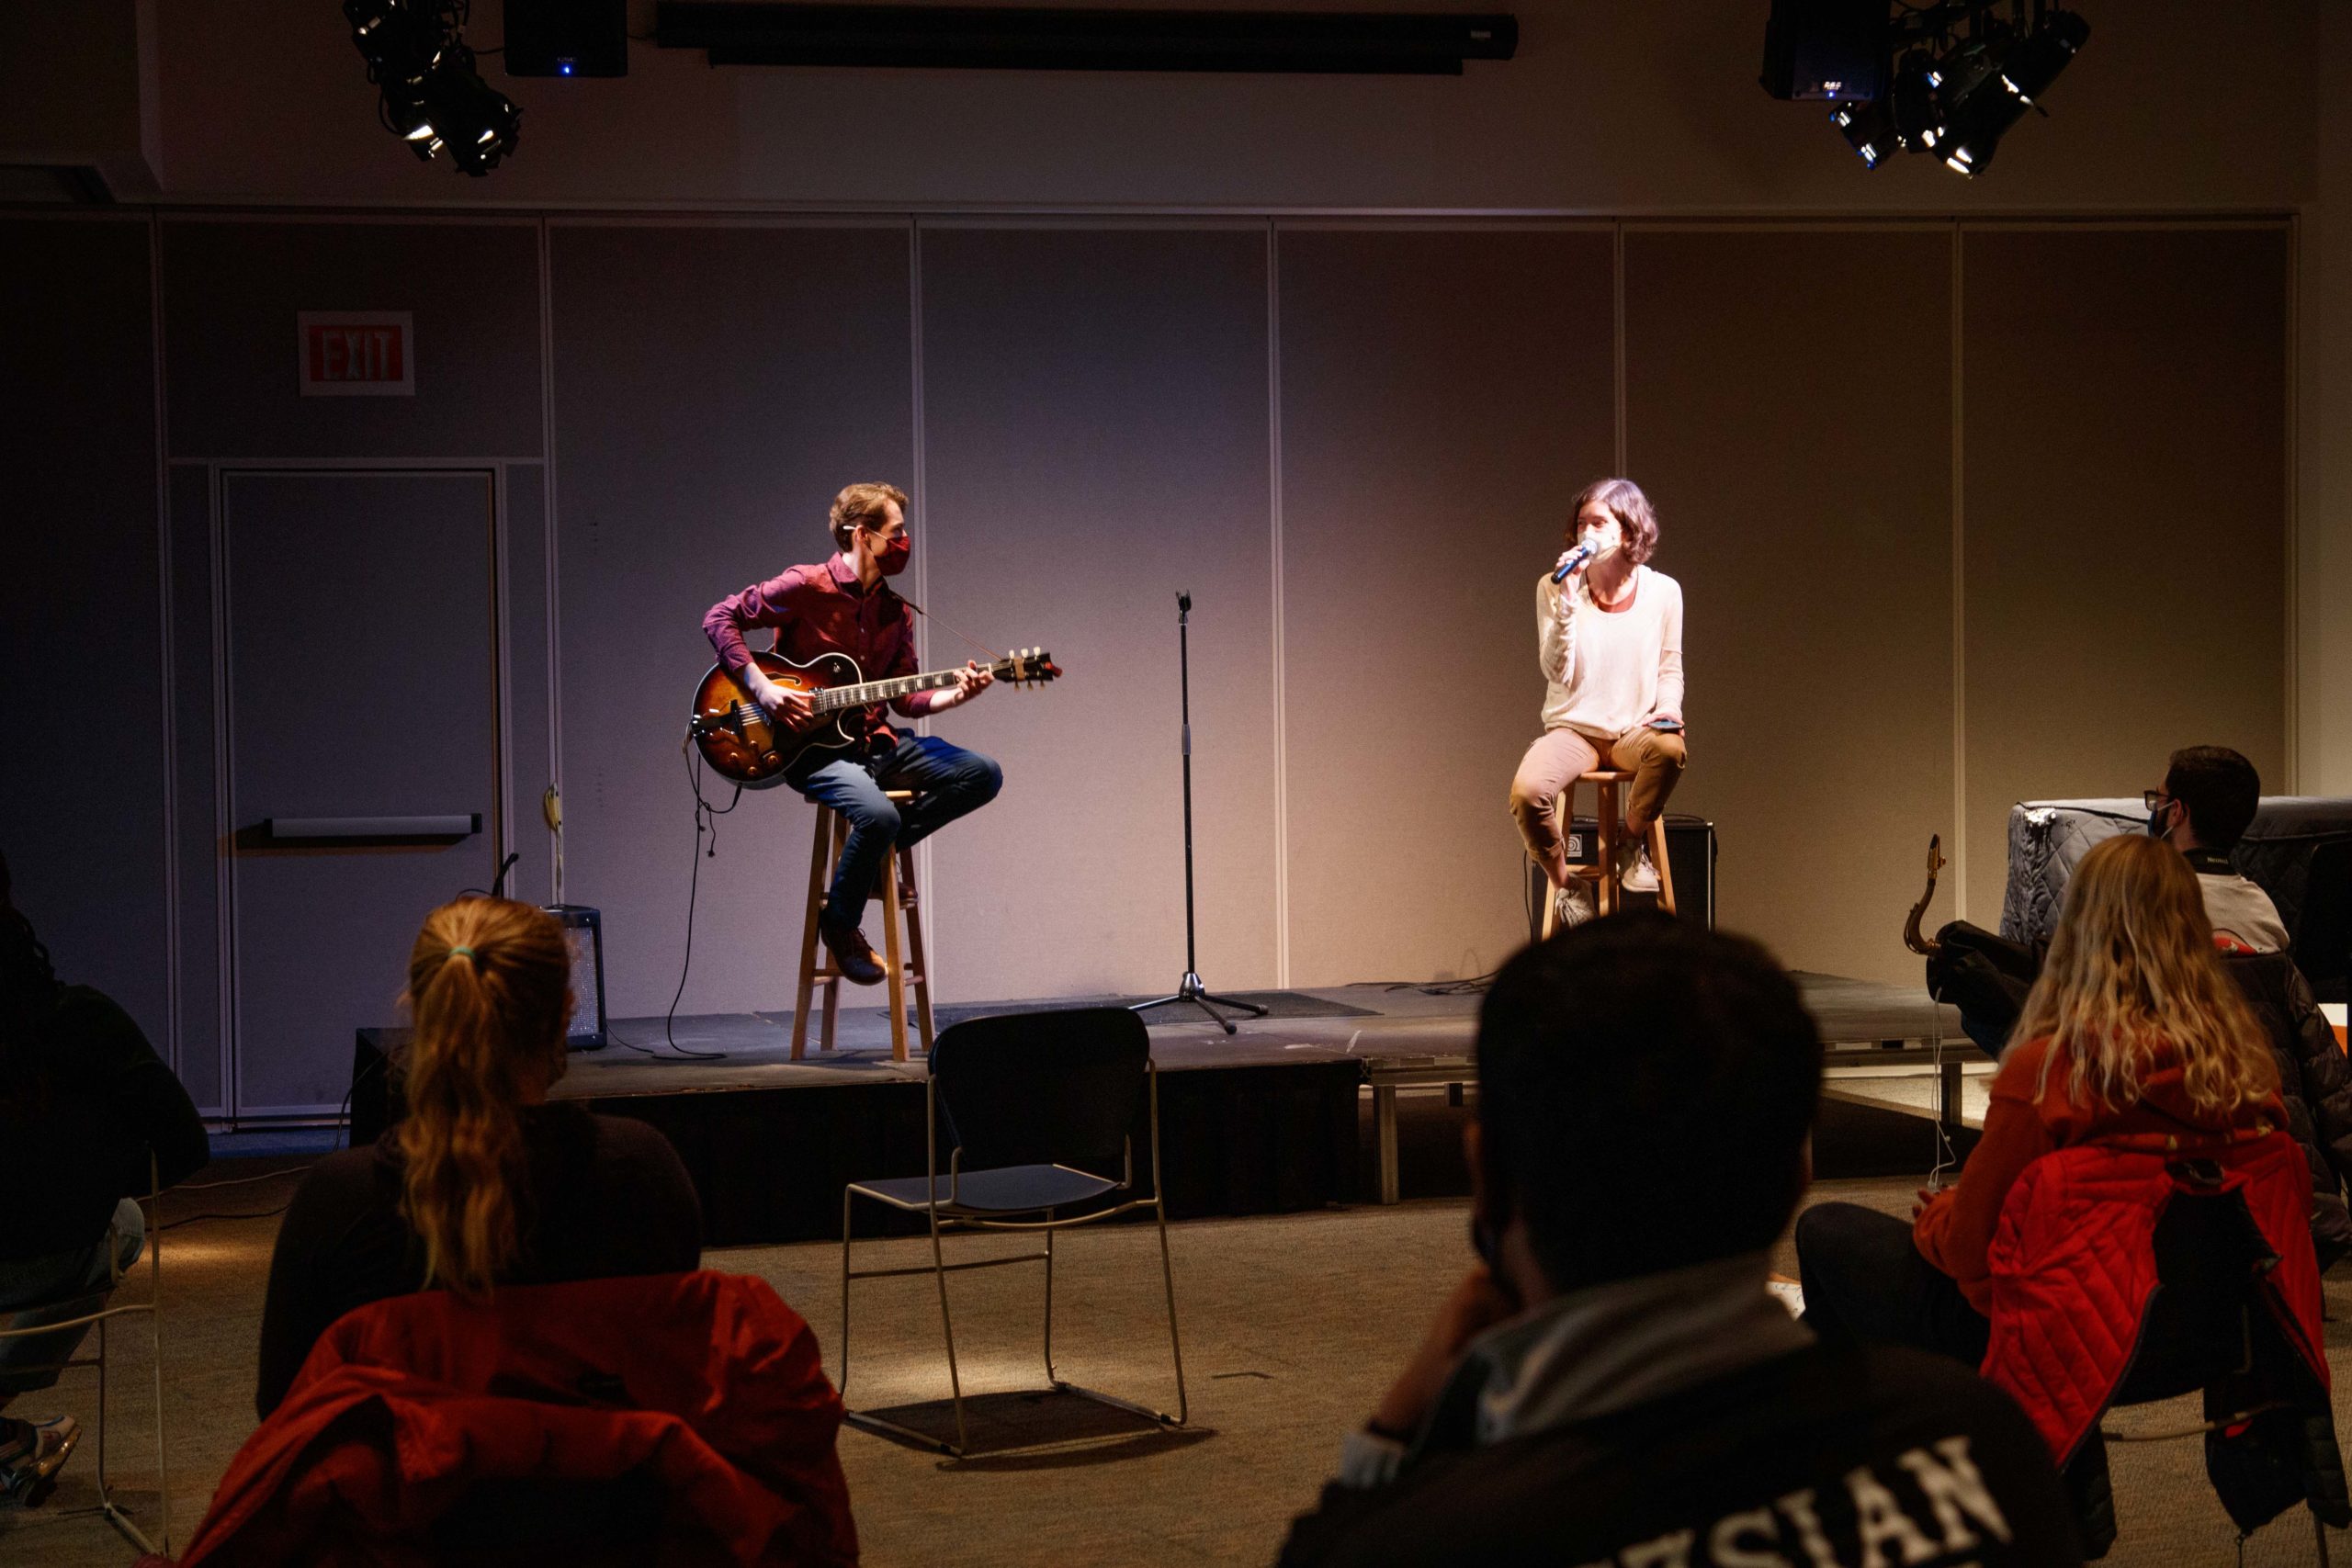 Two musicians, Jackson Peters and Linnea Morris, performing masked and distanced on stage with small audience visible.